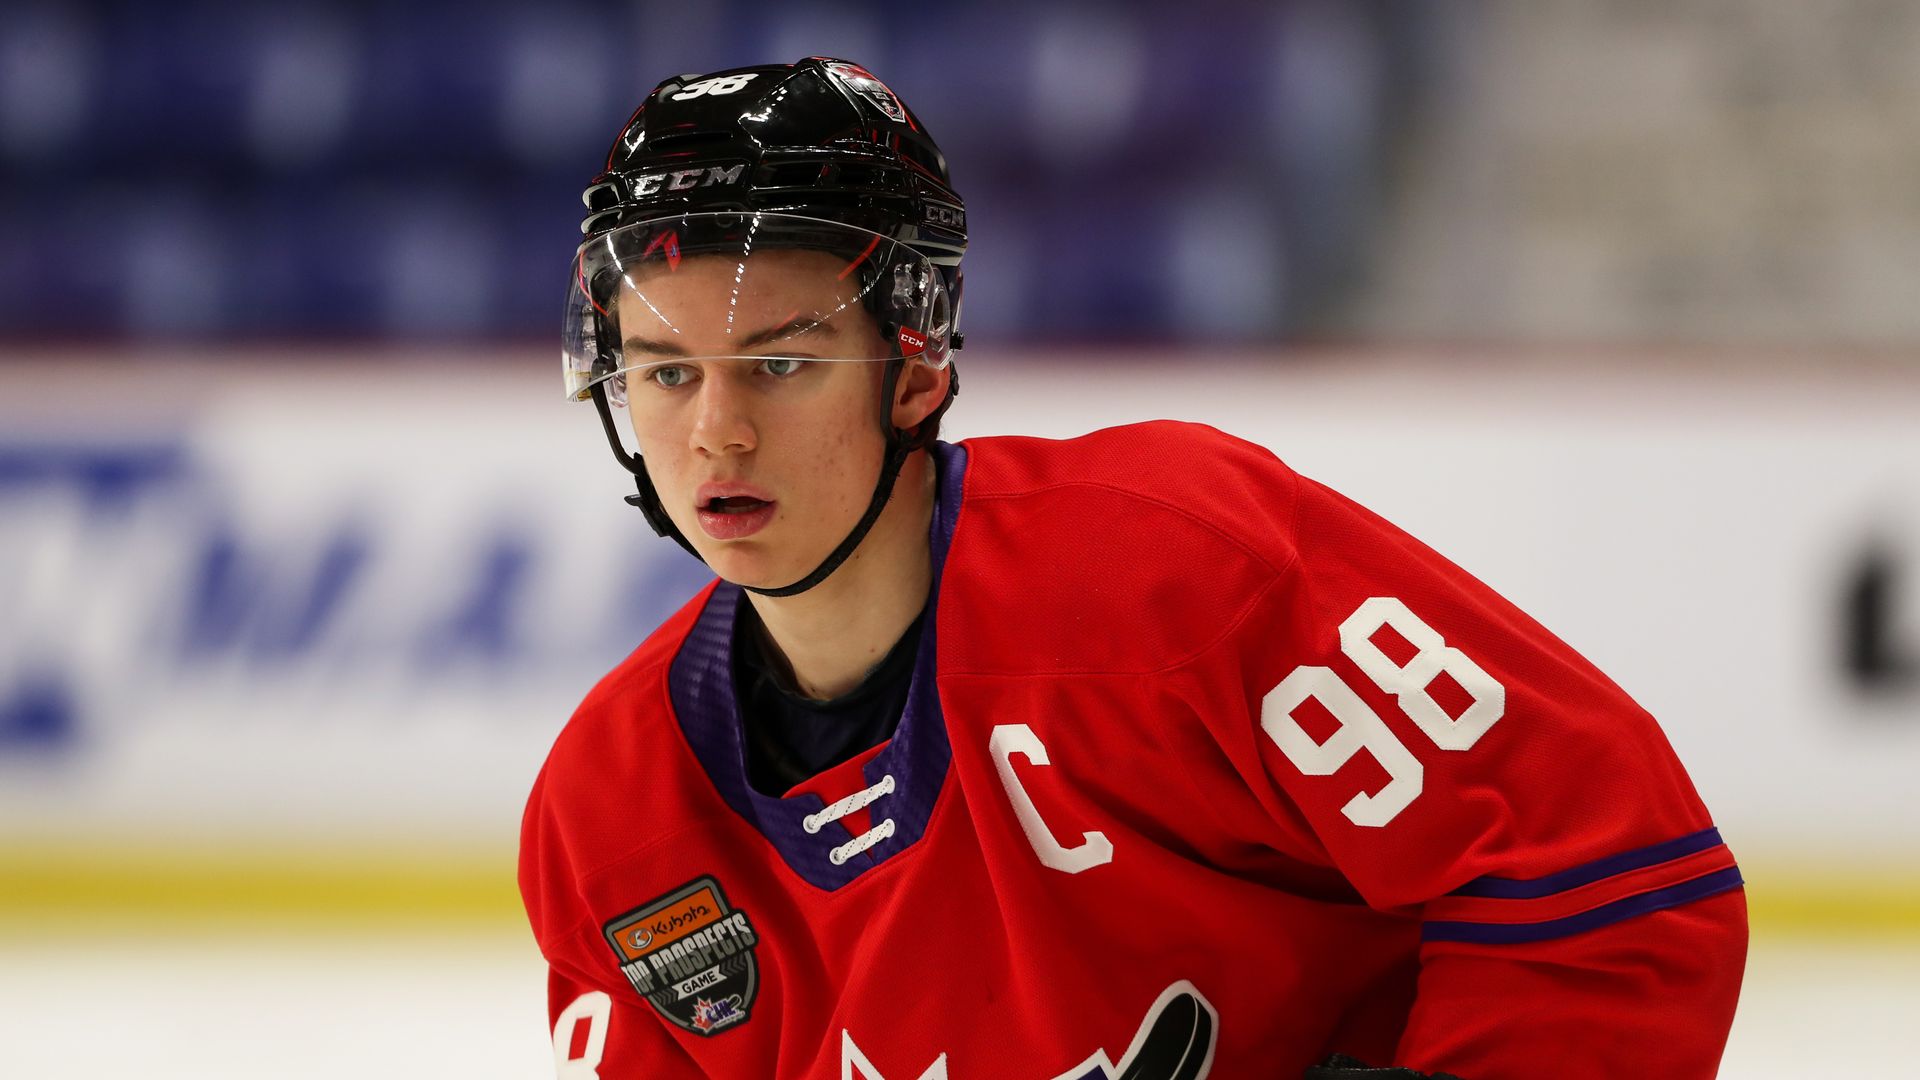 Bedard, 16, youngest to score 4 goals in world juniors game